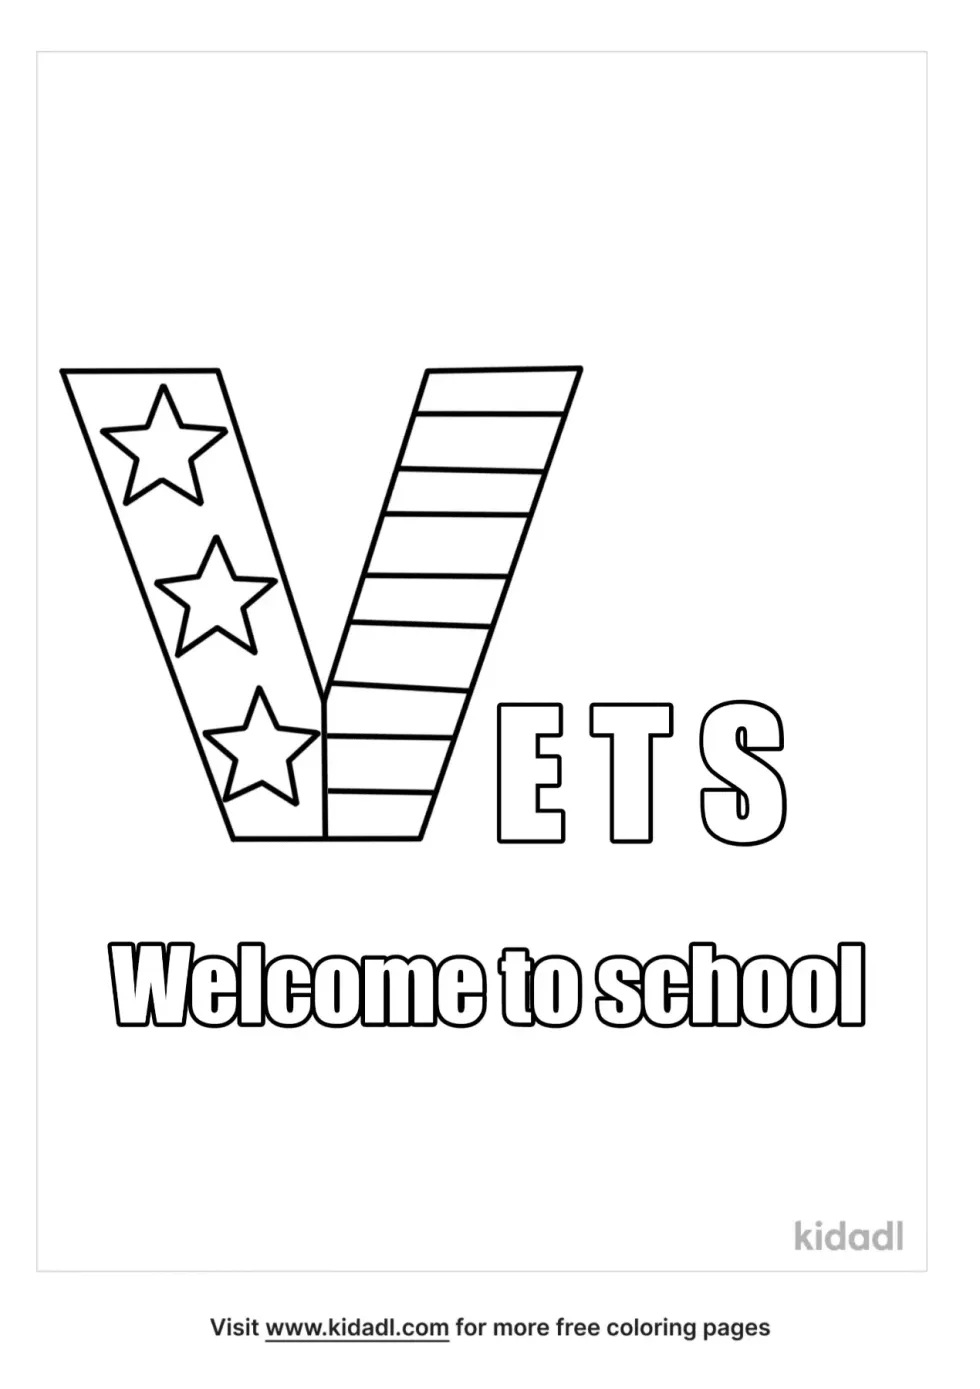 Welcome Vets To School Coloring Page